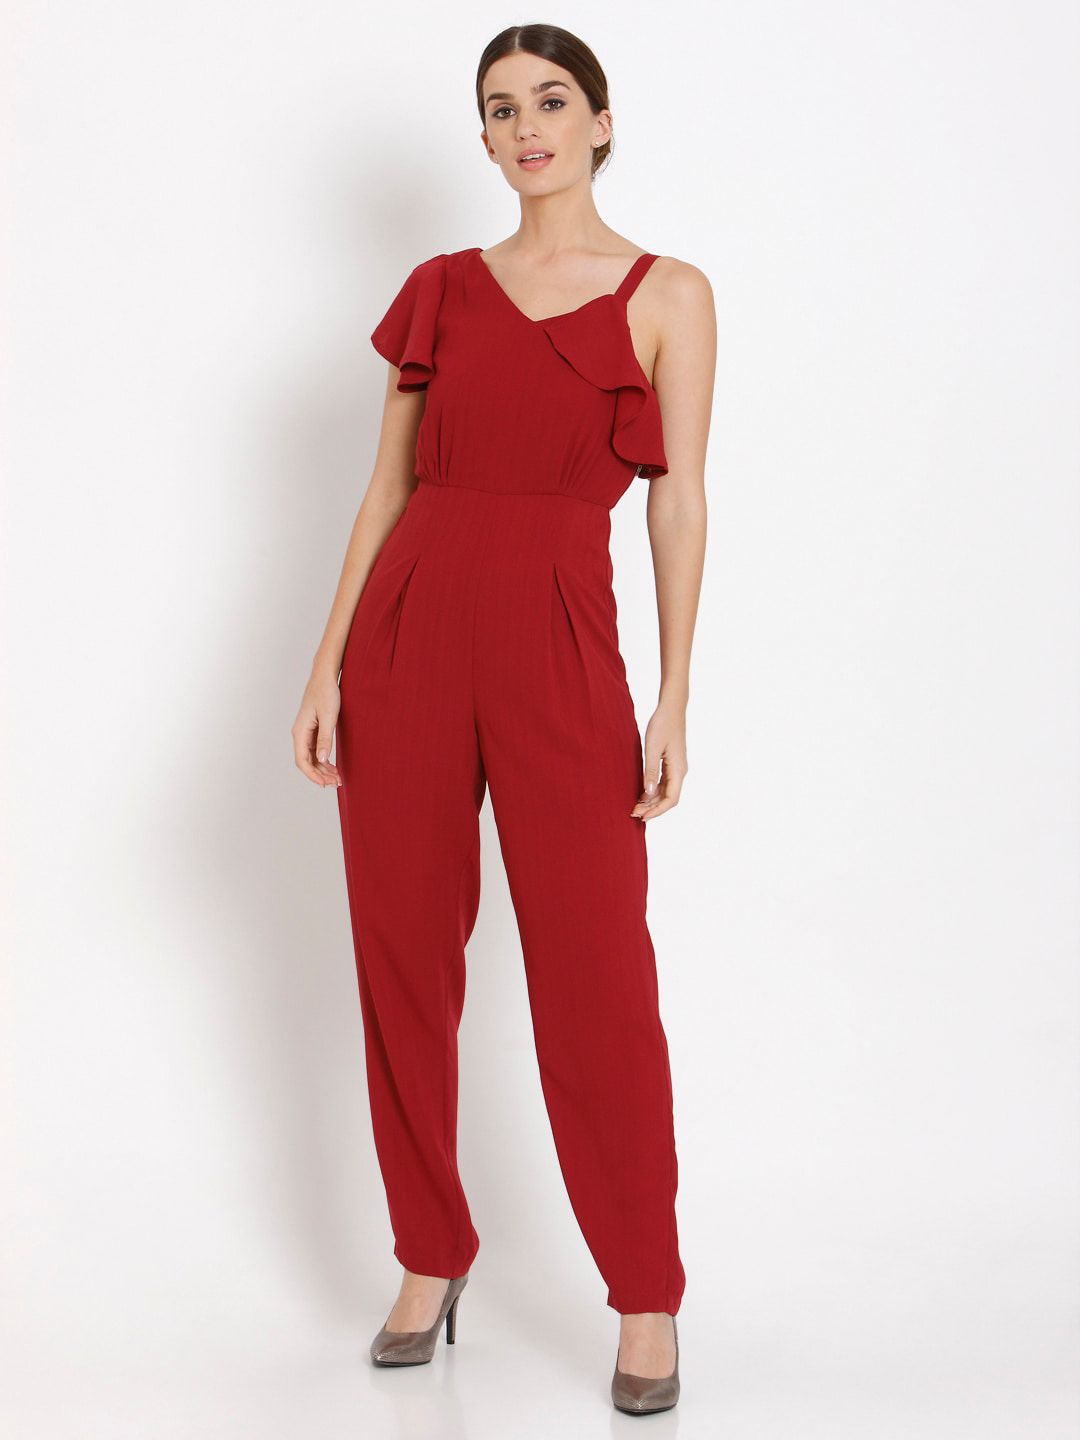 Vero Moda Red Basic Jumpsuit with Ruffles Price in India